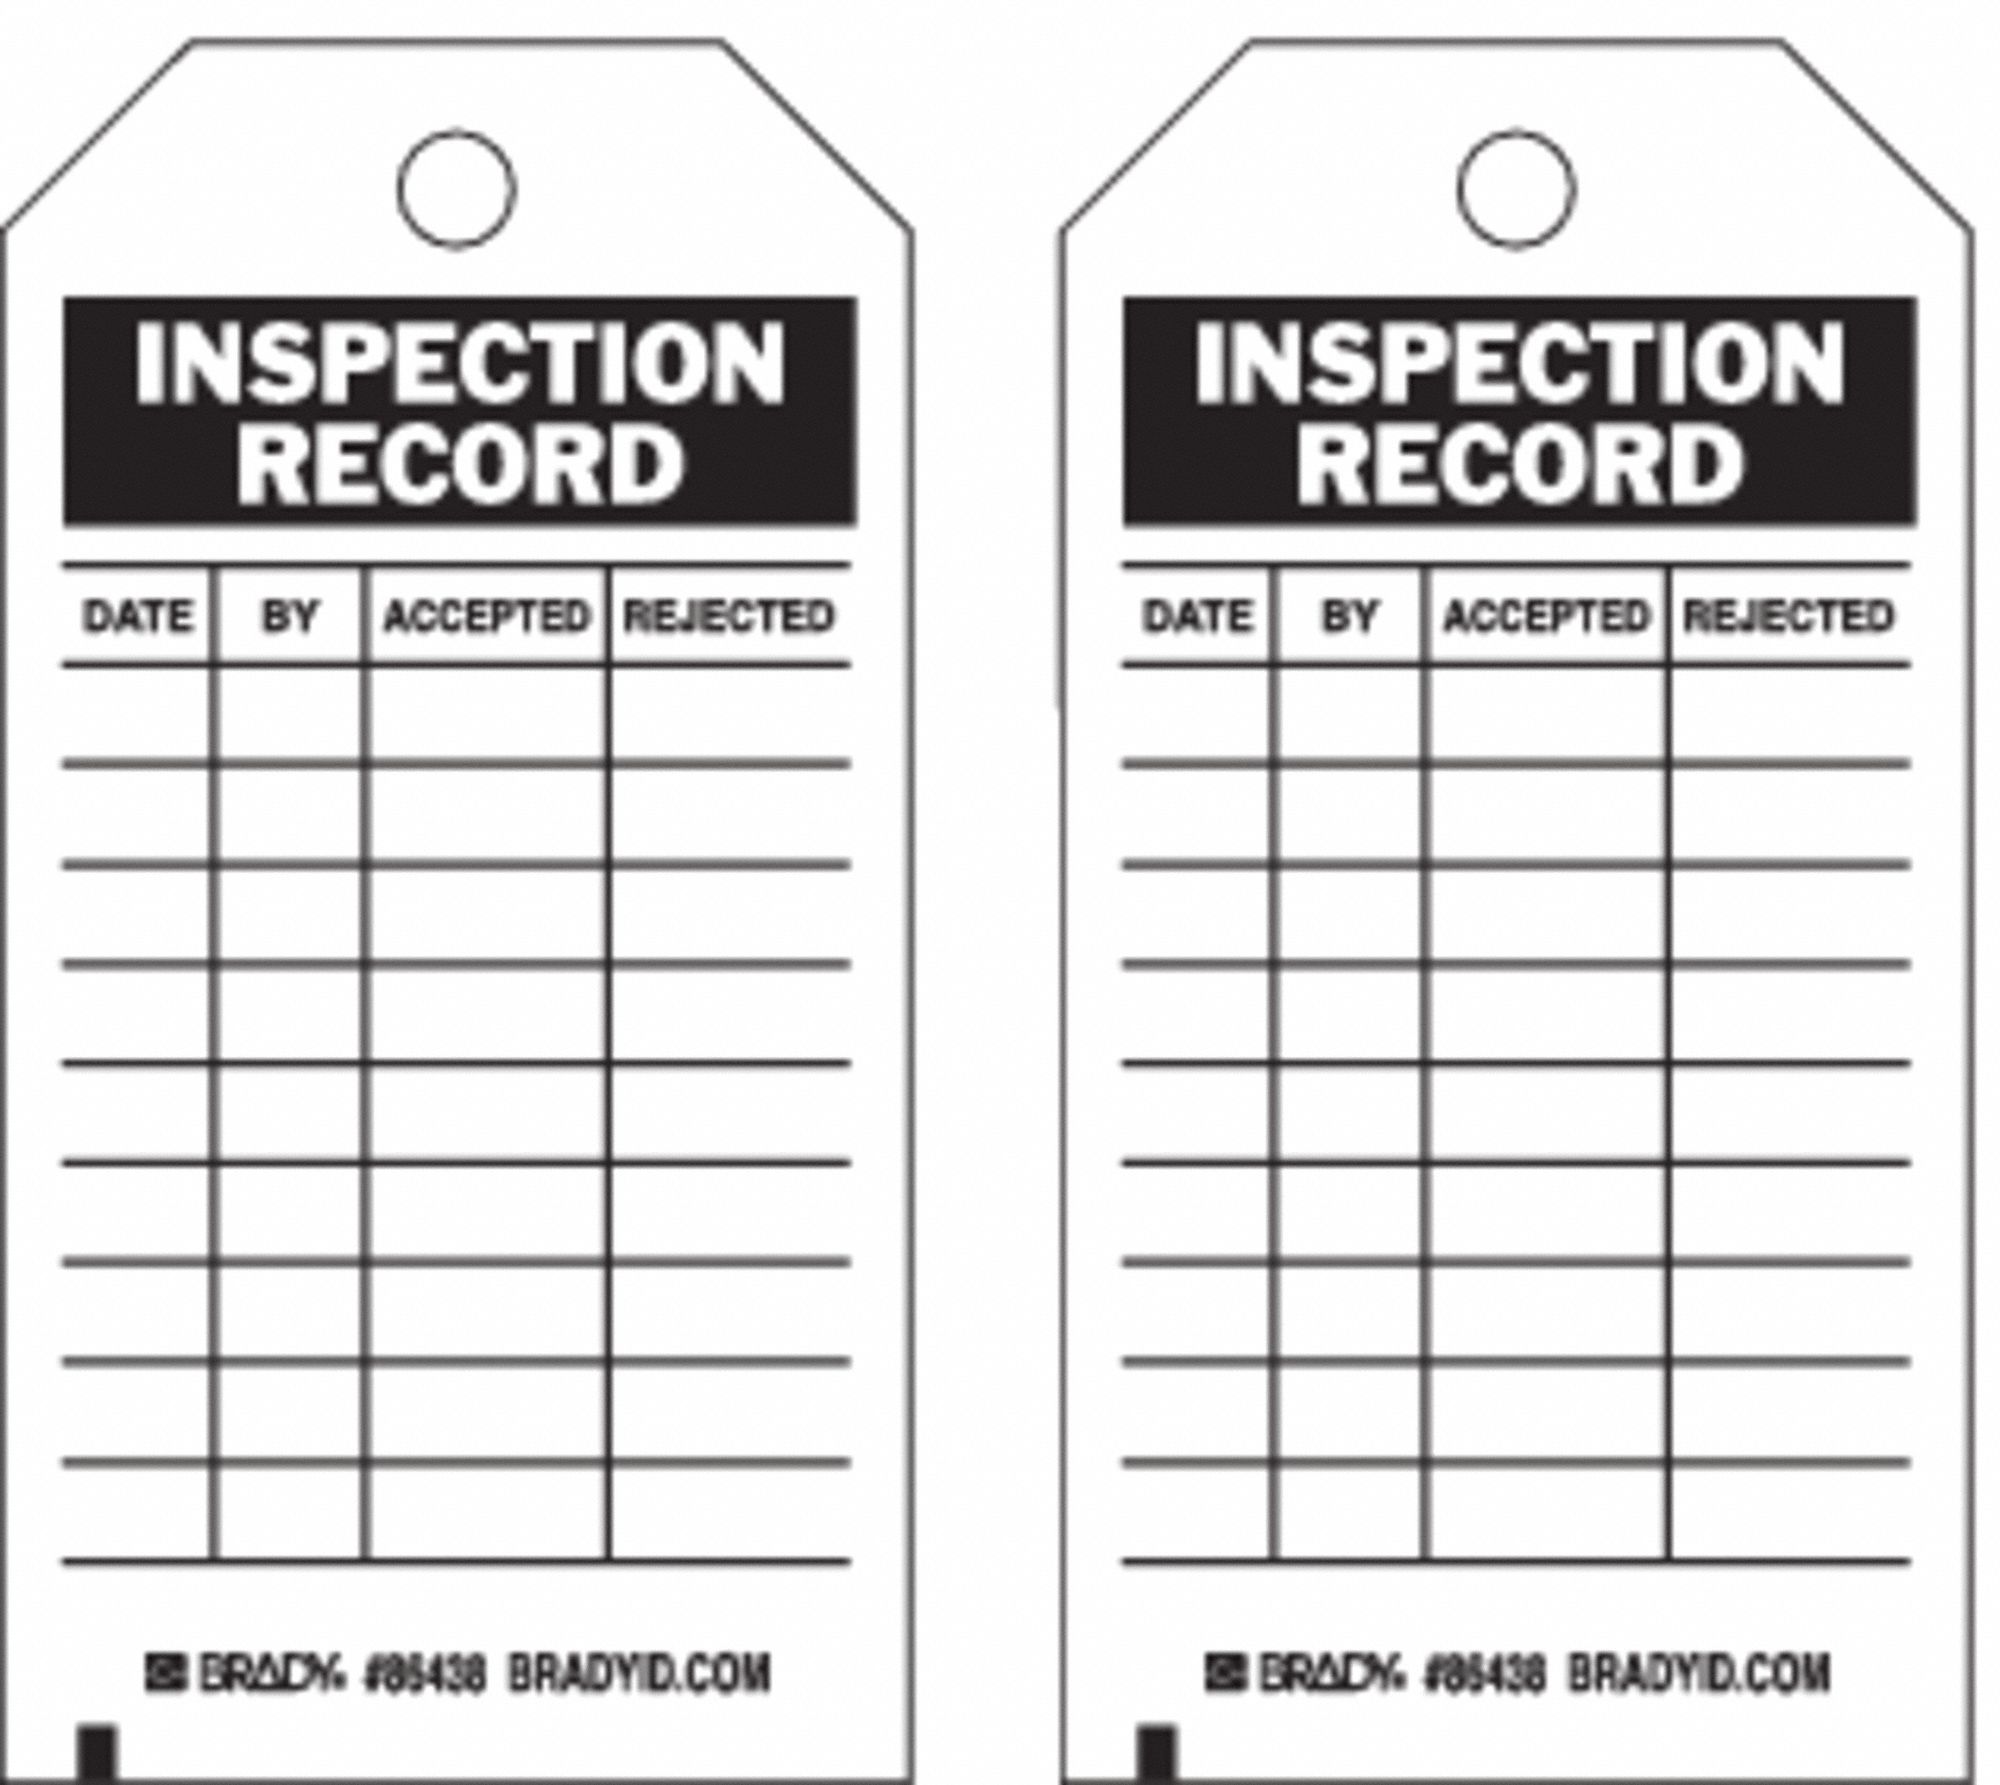 Heavy-Duty PolyesterDate By Accepted Rejected Inspection Record Tag 5-3/4